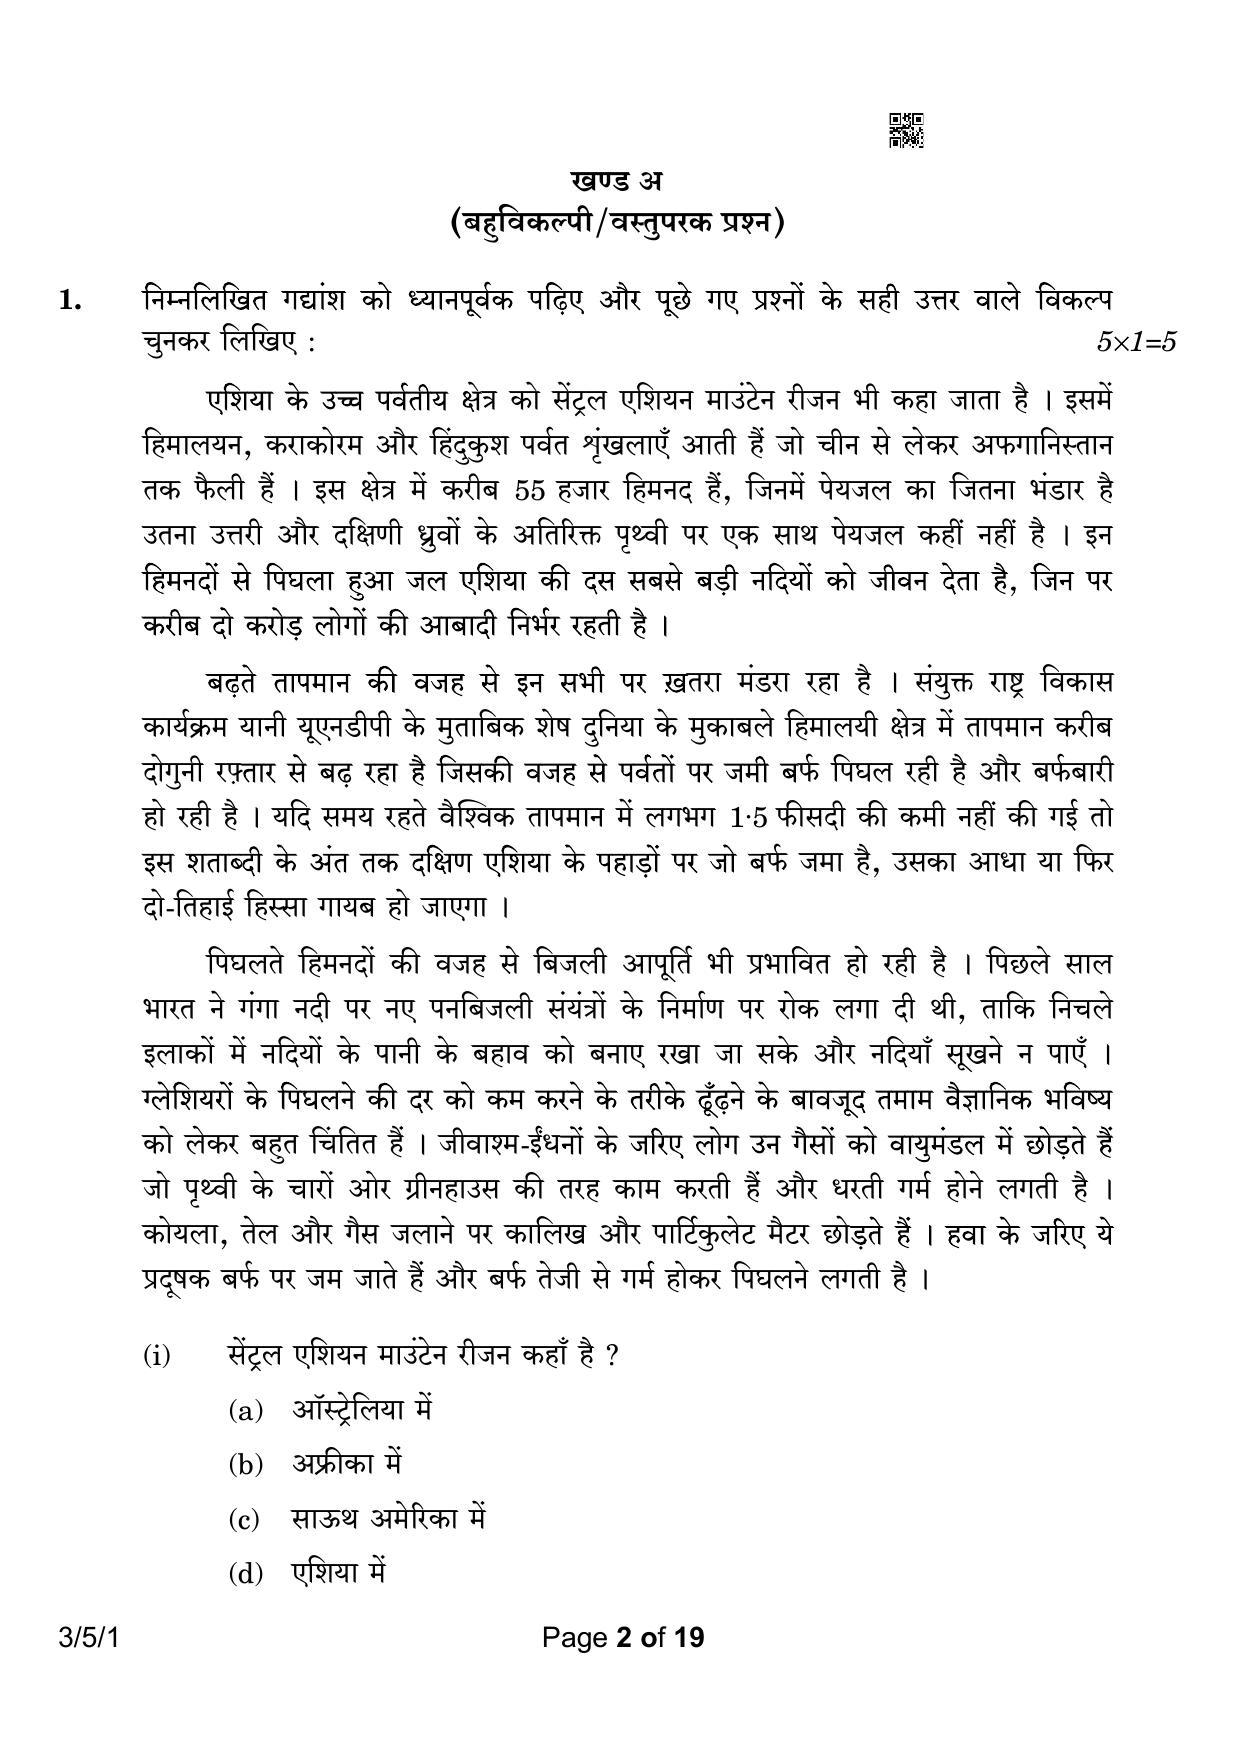 CBSE Class 10 3-5-1 Hindi A 2023 Question Paper - Page 2